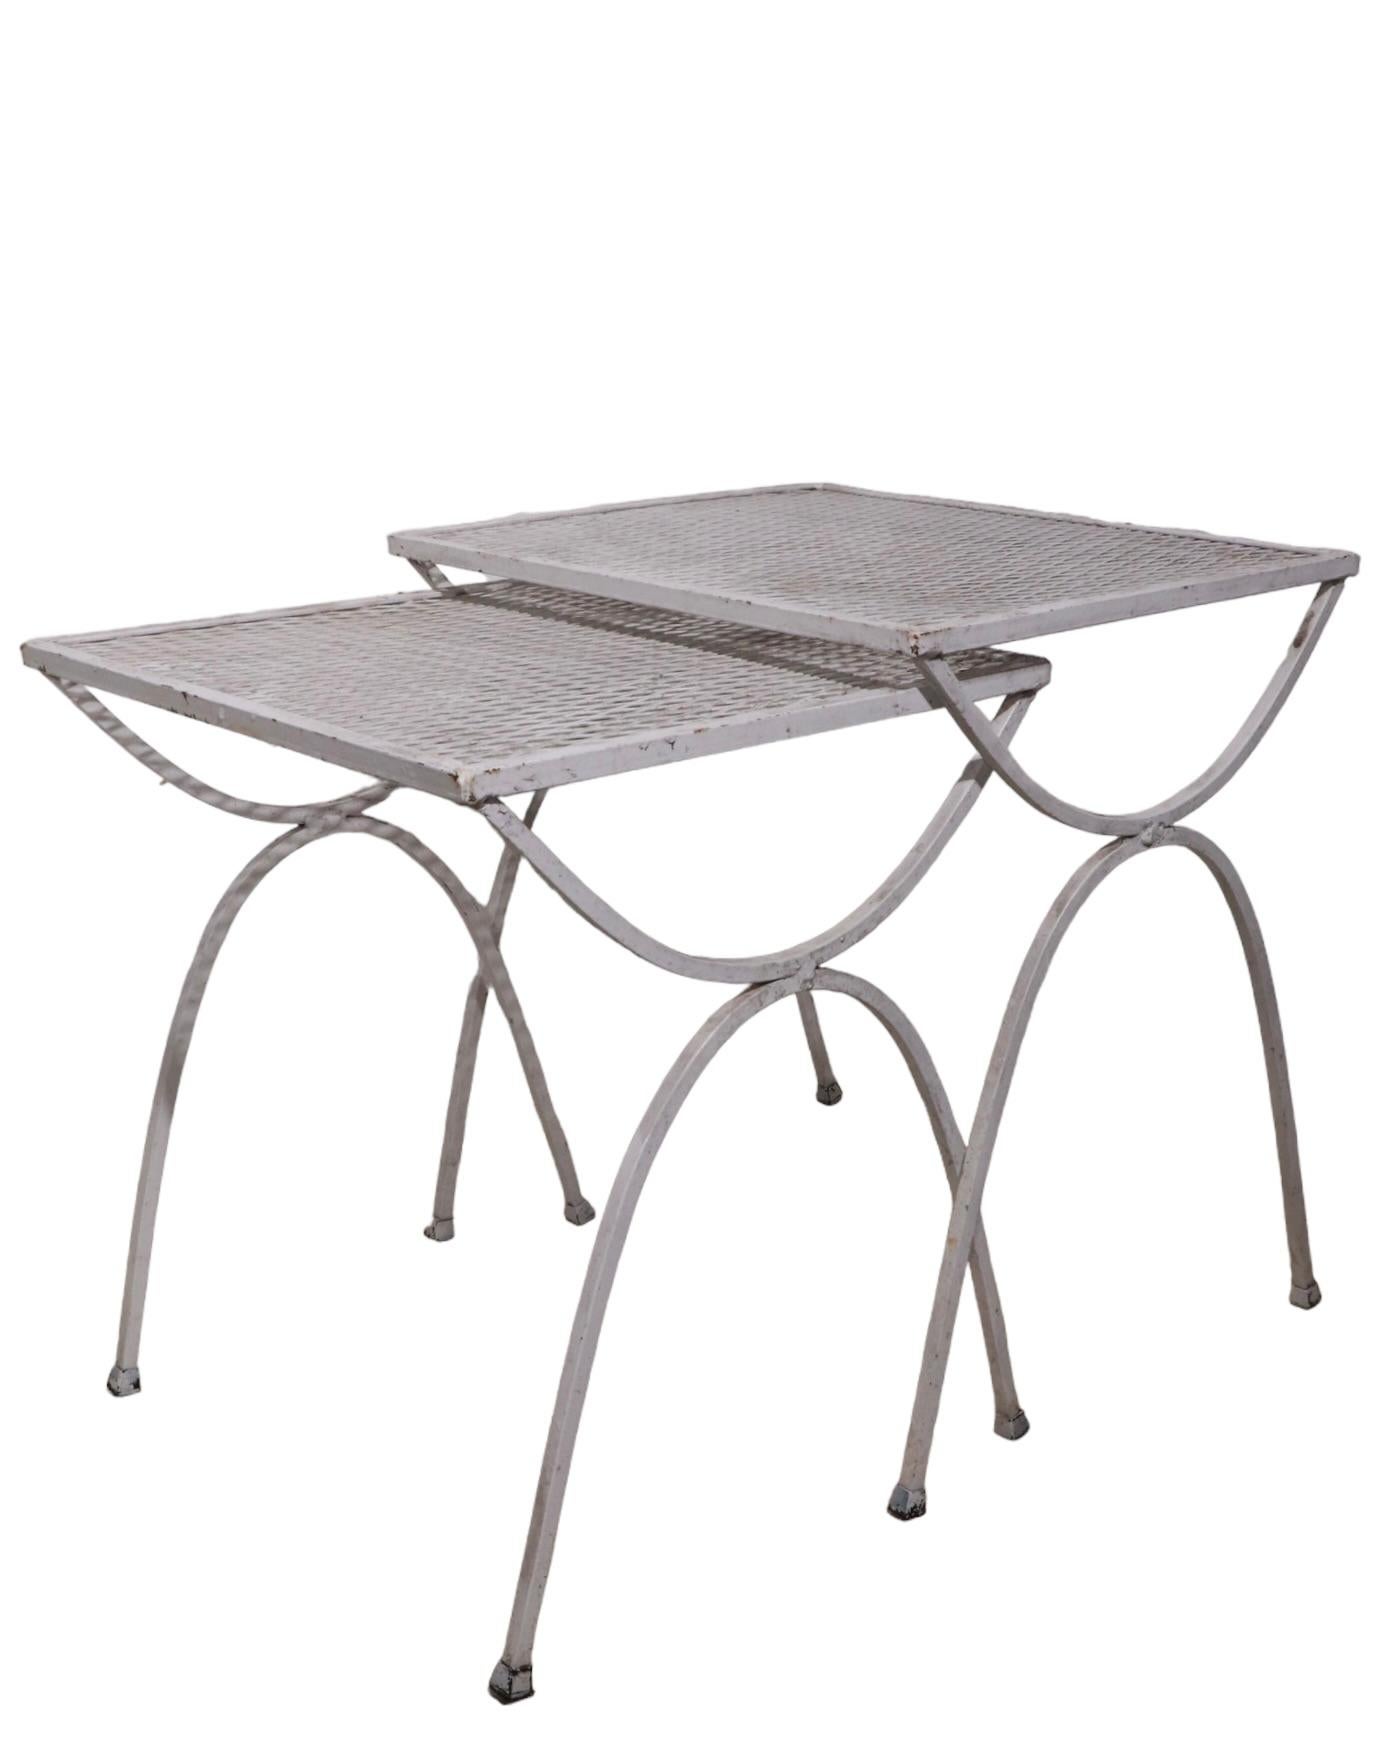 20th Century Two Piece Garden Patio Poolside Nesting Tables by Salterini 2 Sets Available For Sale